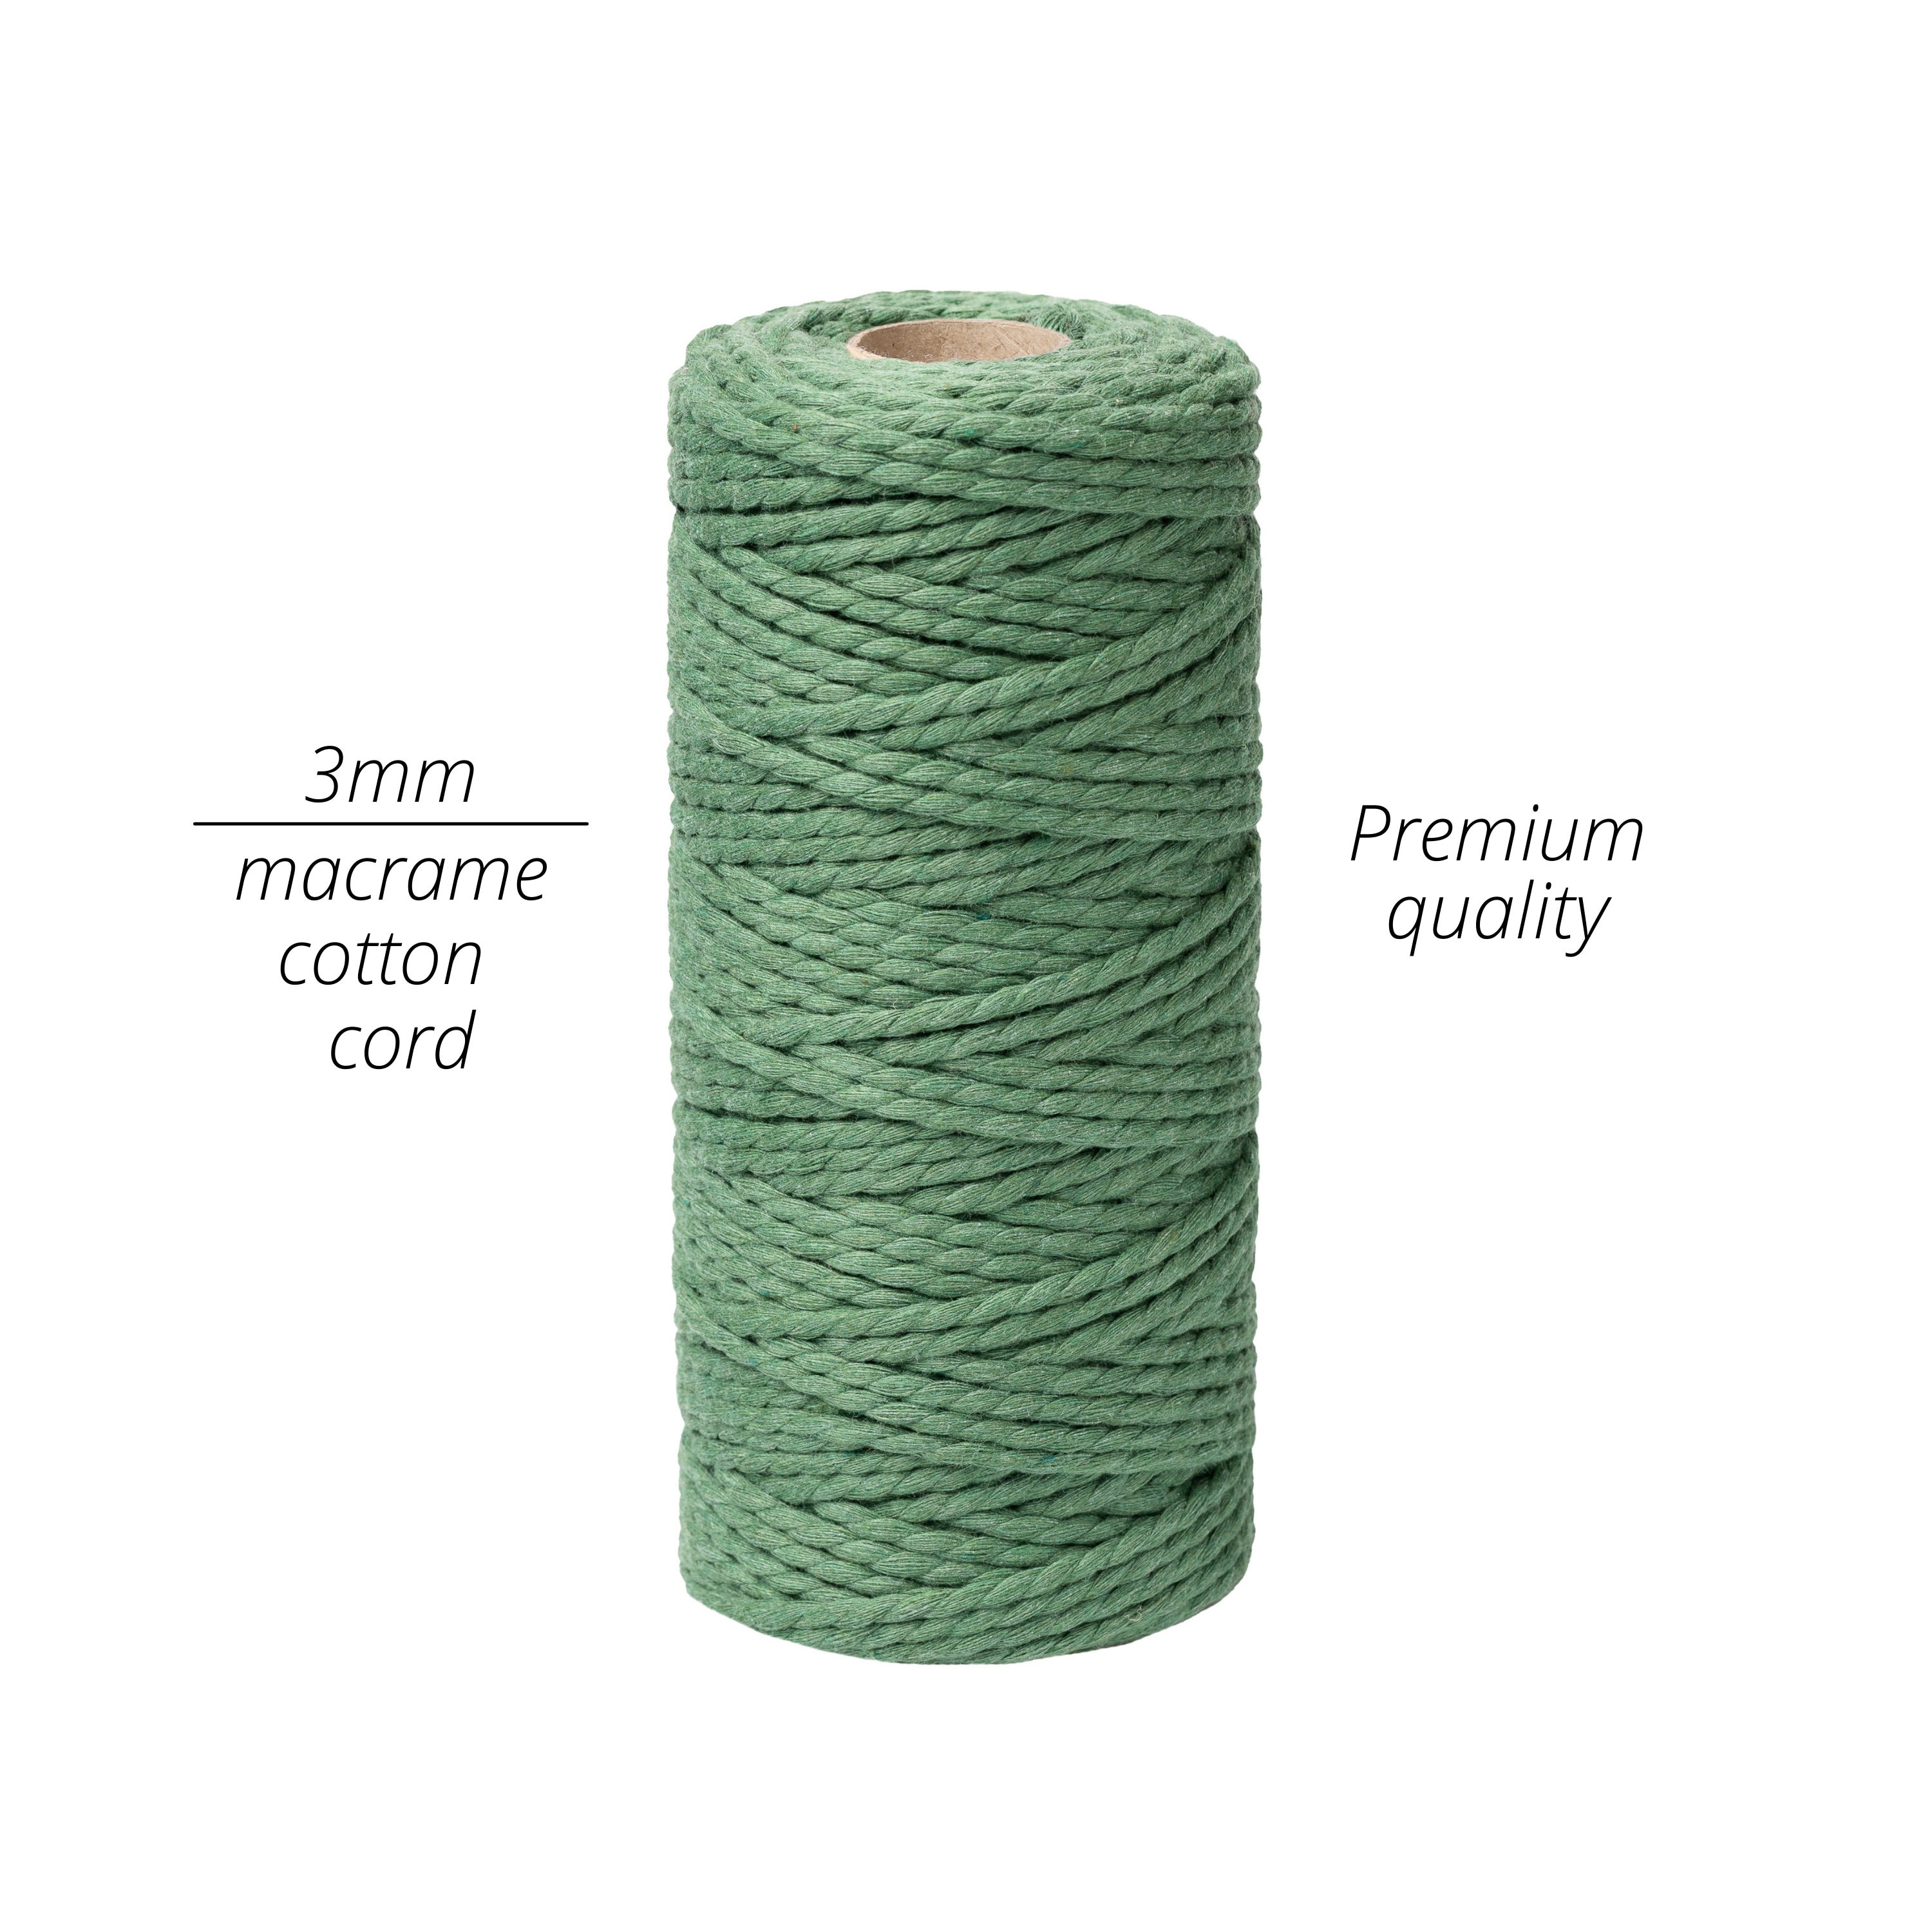 Macrame Cord Cotton Rope 3 mm 1/8 in, 153 yd – 1 PLY Super Soft Cotton  Single Twisted String for Macrame Dream Catcher, Boho Wall Hanging Feather